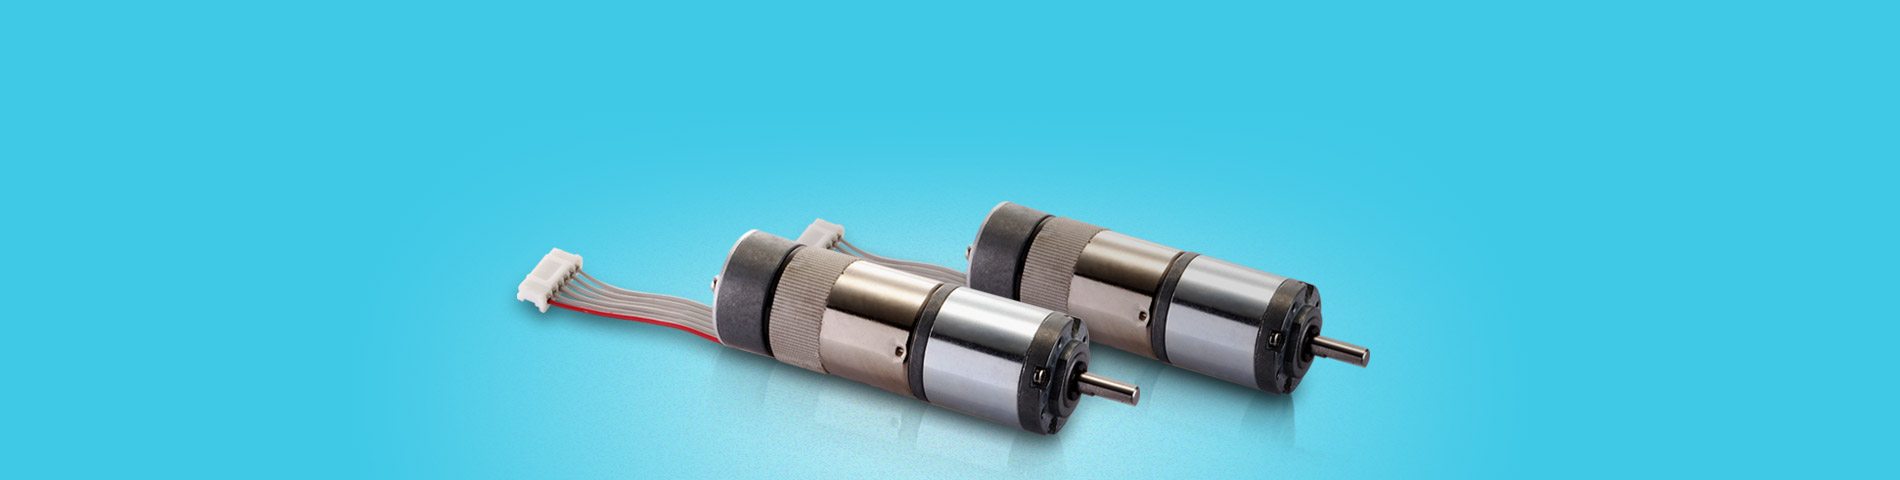 Contact Us for more details and Get the Appropriate Gear Motor to enhance your product value